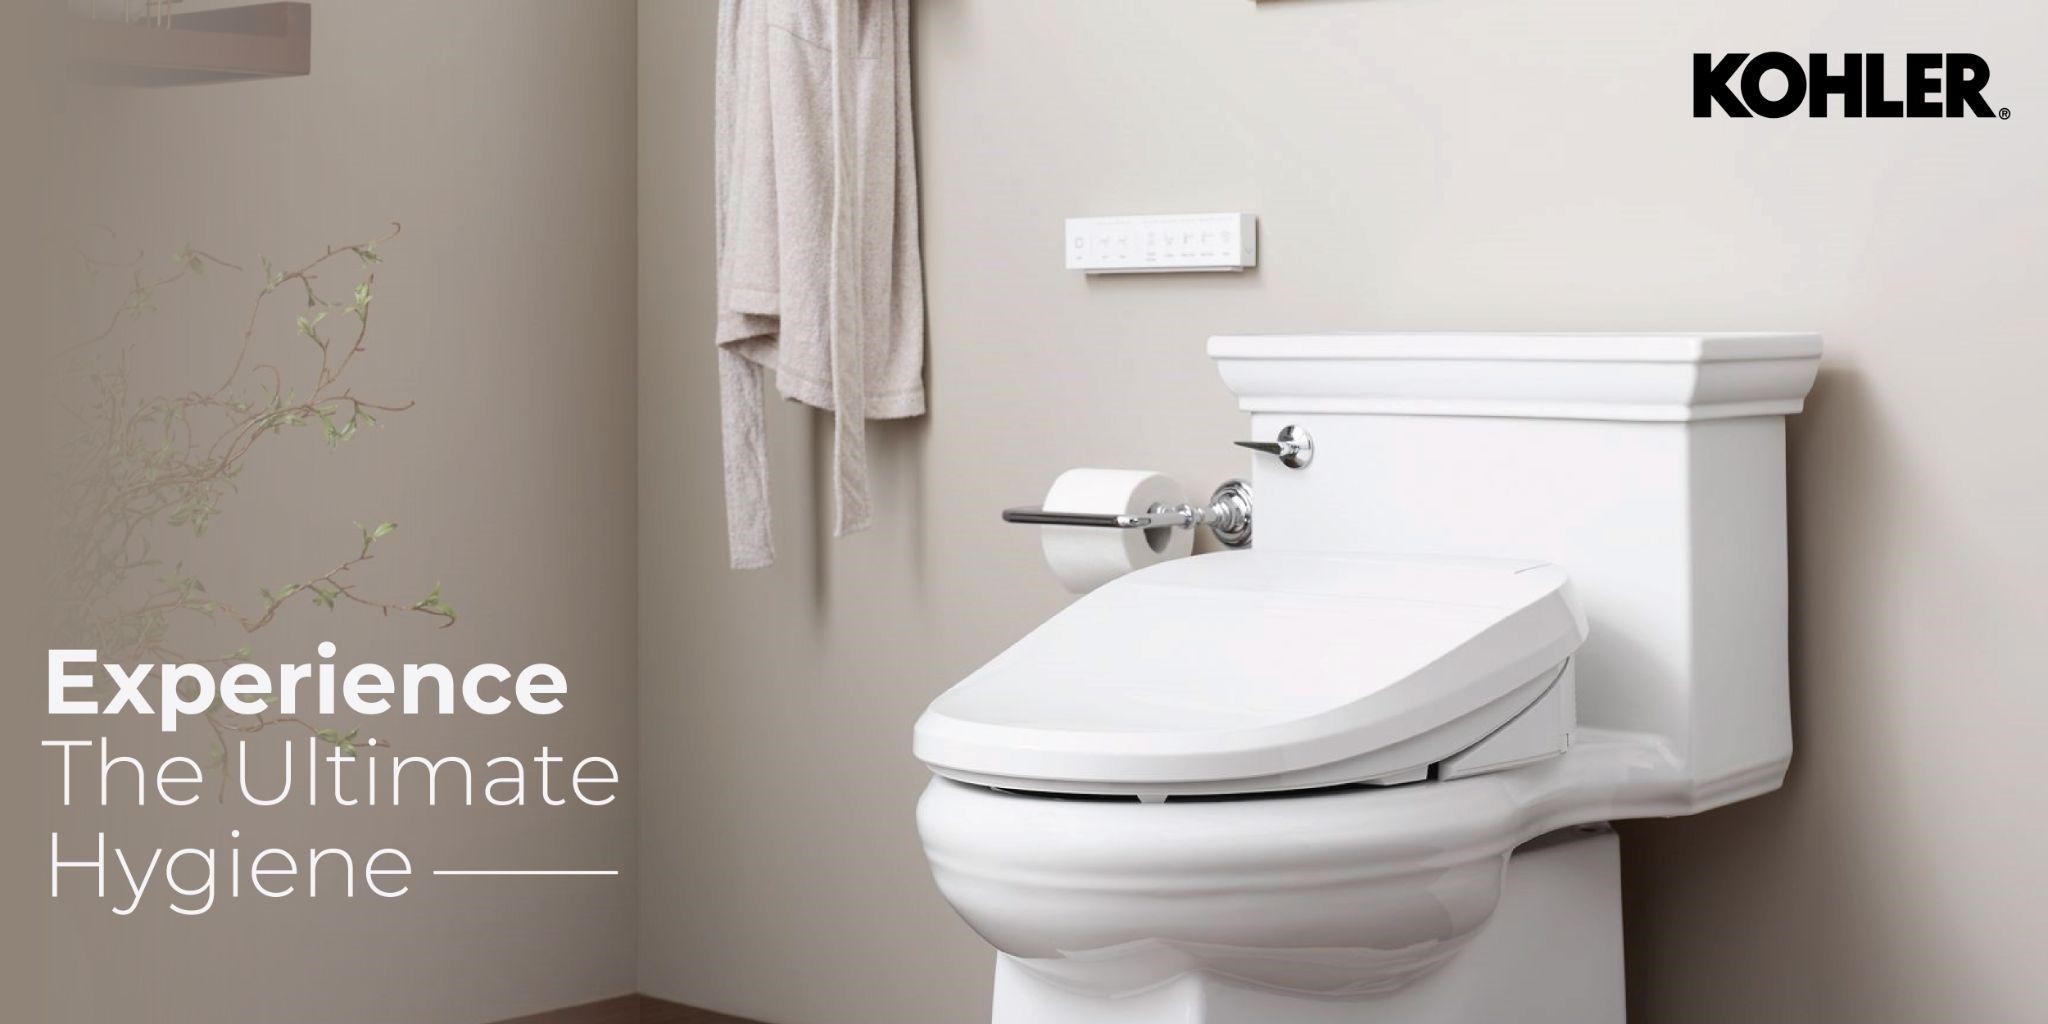 4 TYPES OF BIDET TOILETS AND HOW TO USE THEM WITH CARE